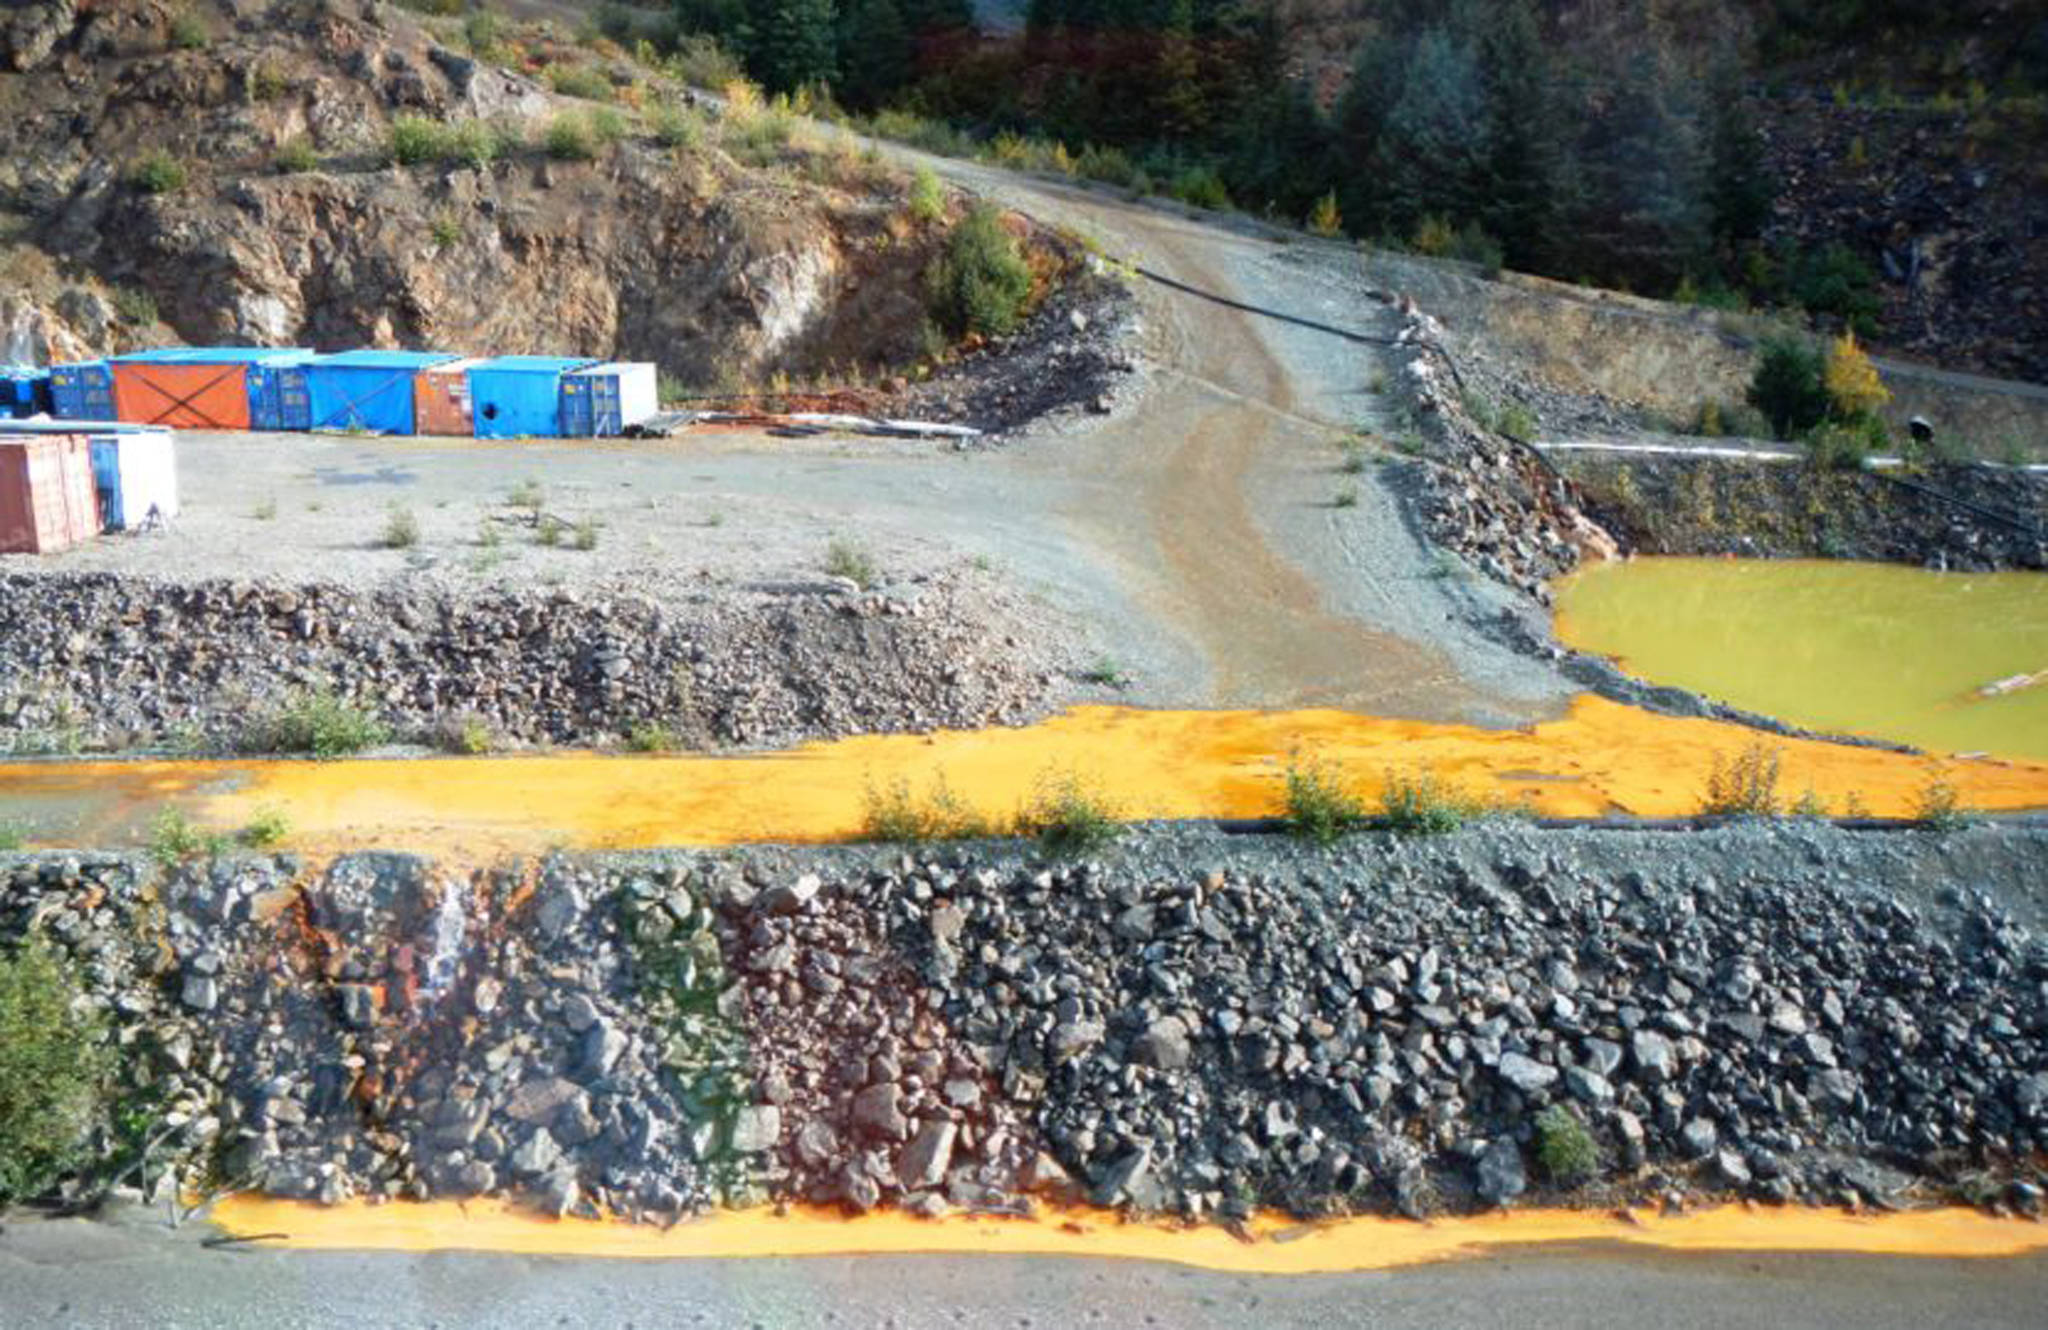 The Tulsequah Chief Mine is seen on Sept. 26, 2016. The yellow water is Acidic Mine Drainage from shuttered mine adits. It drains into an “exfiltration pond,” pictured, which overflows into the Tulsequah River. (Courtesy Photo)